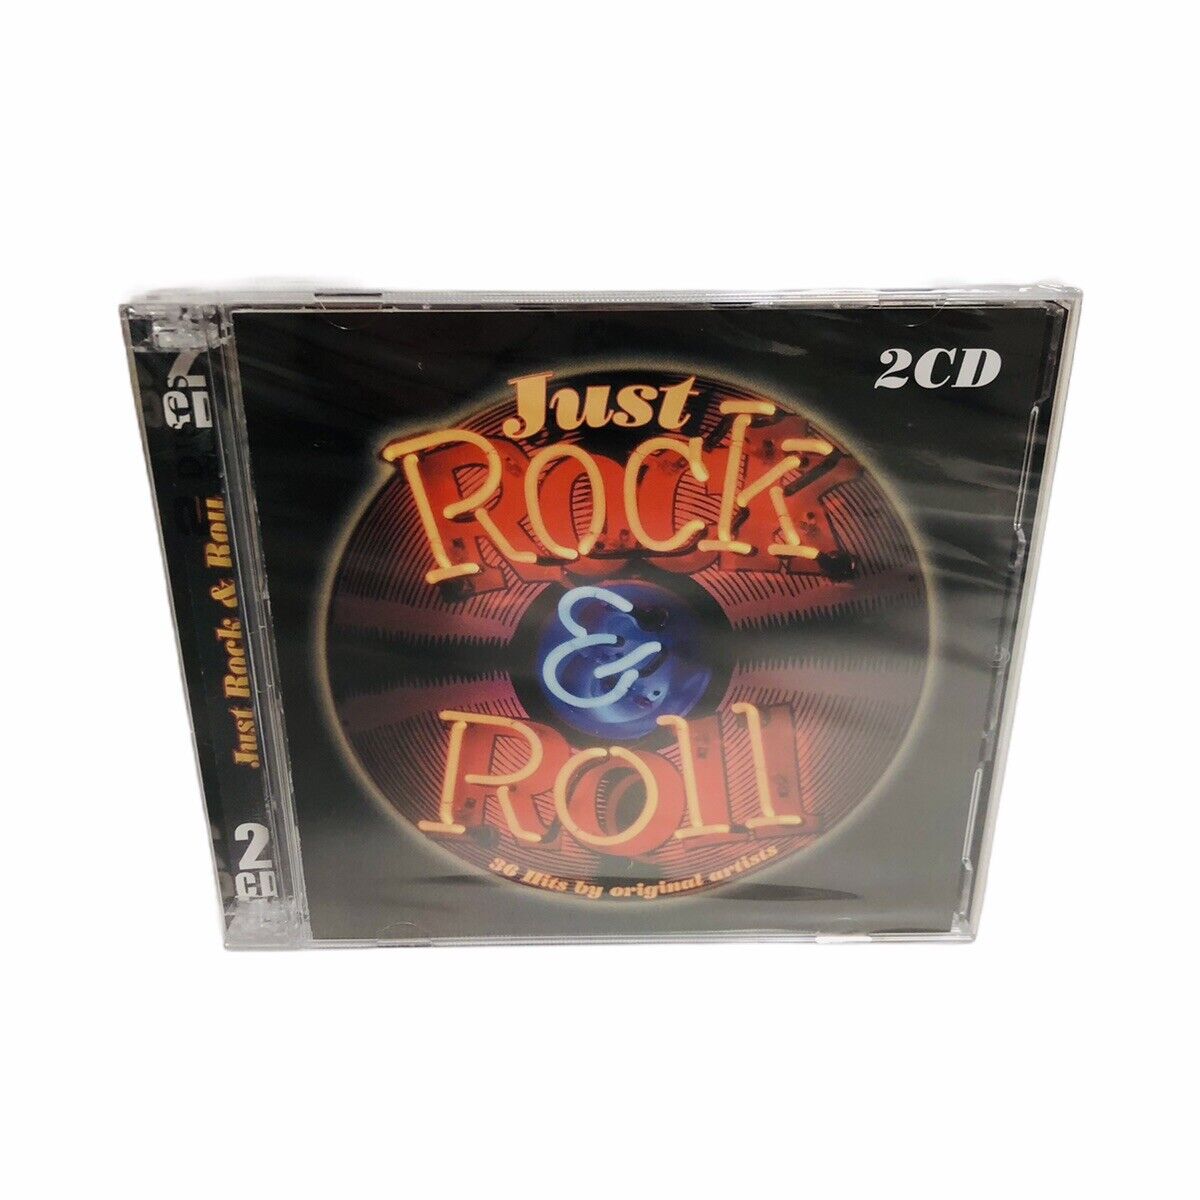 Just Rock and Roll by Various Artists (CD, Nov-2011) Elvis Presley Chuck Berry